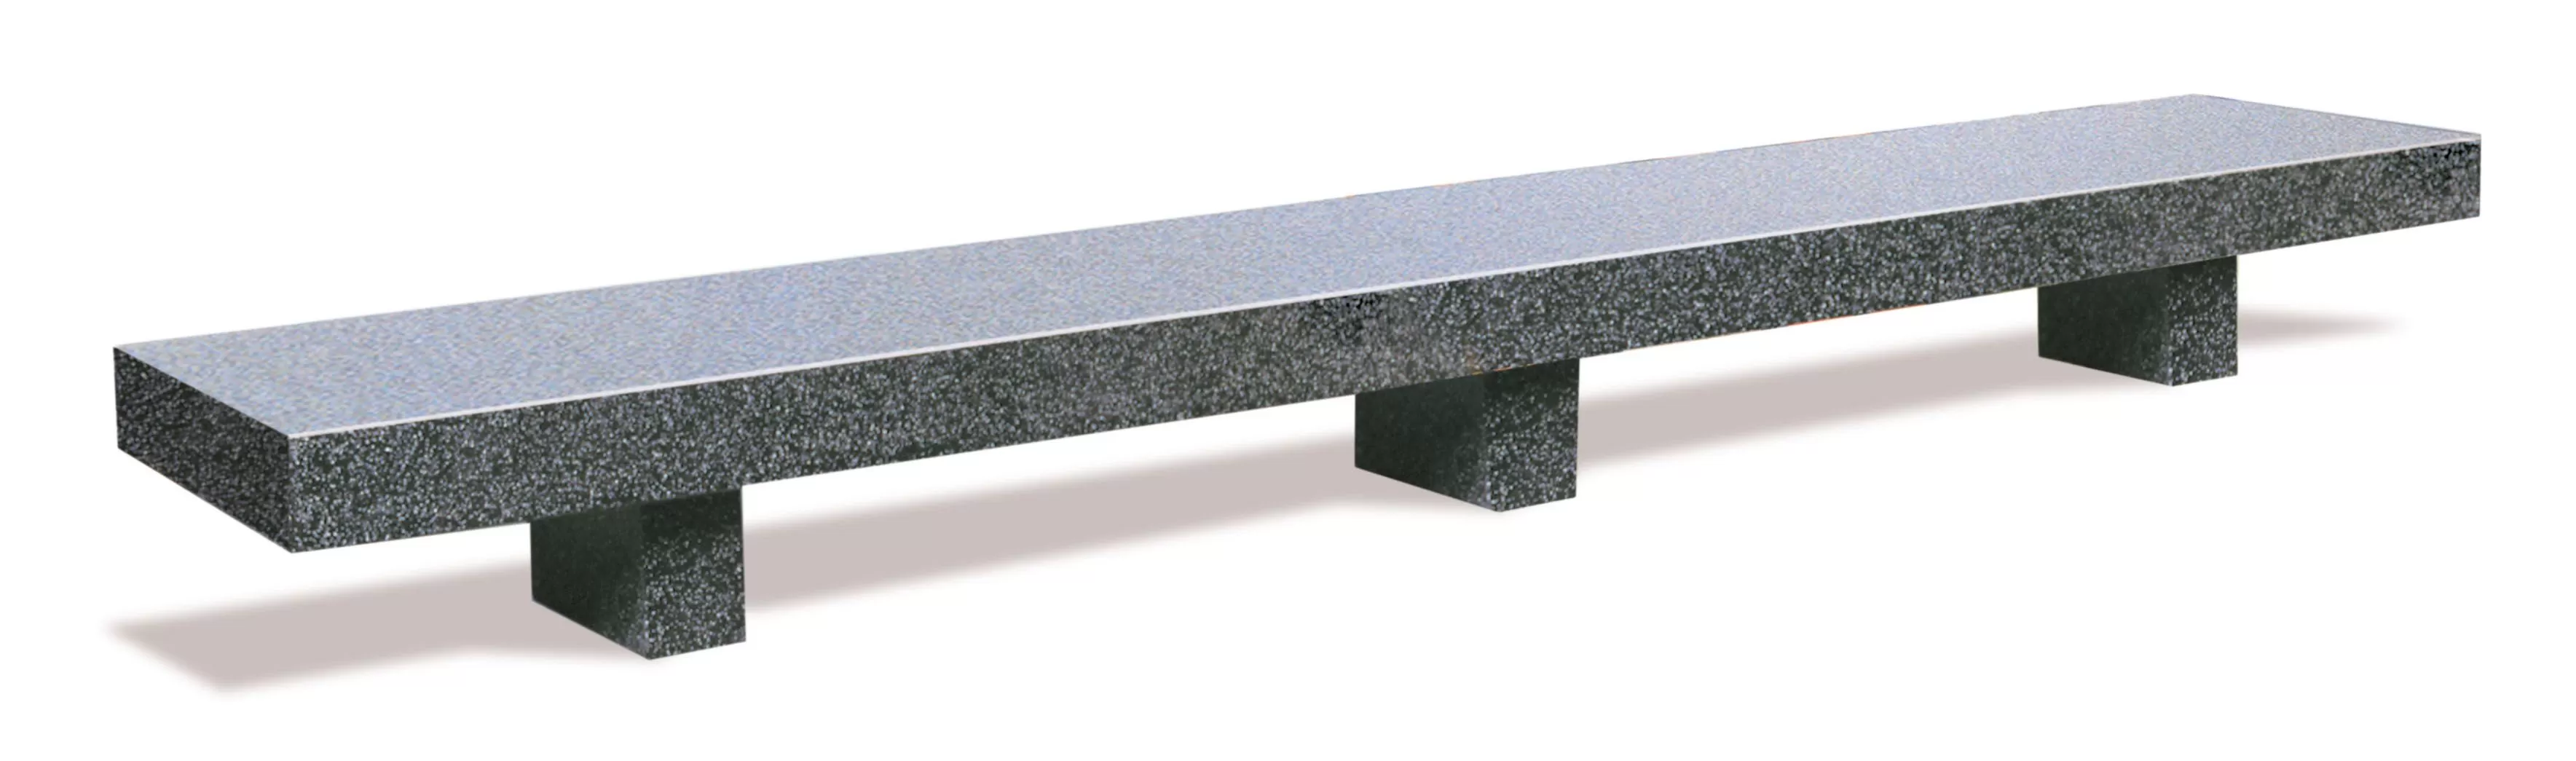 Long concrete bench with three legs